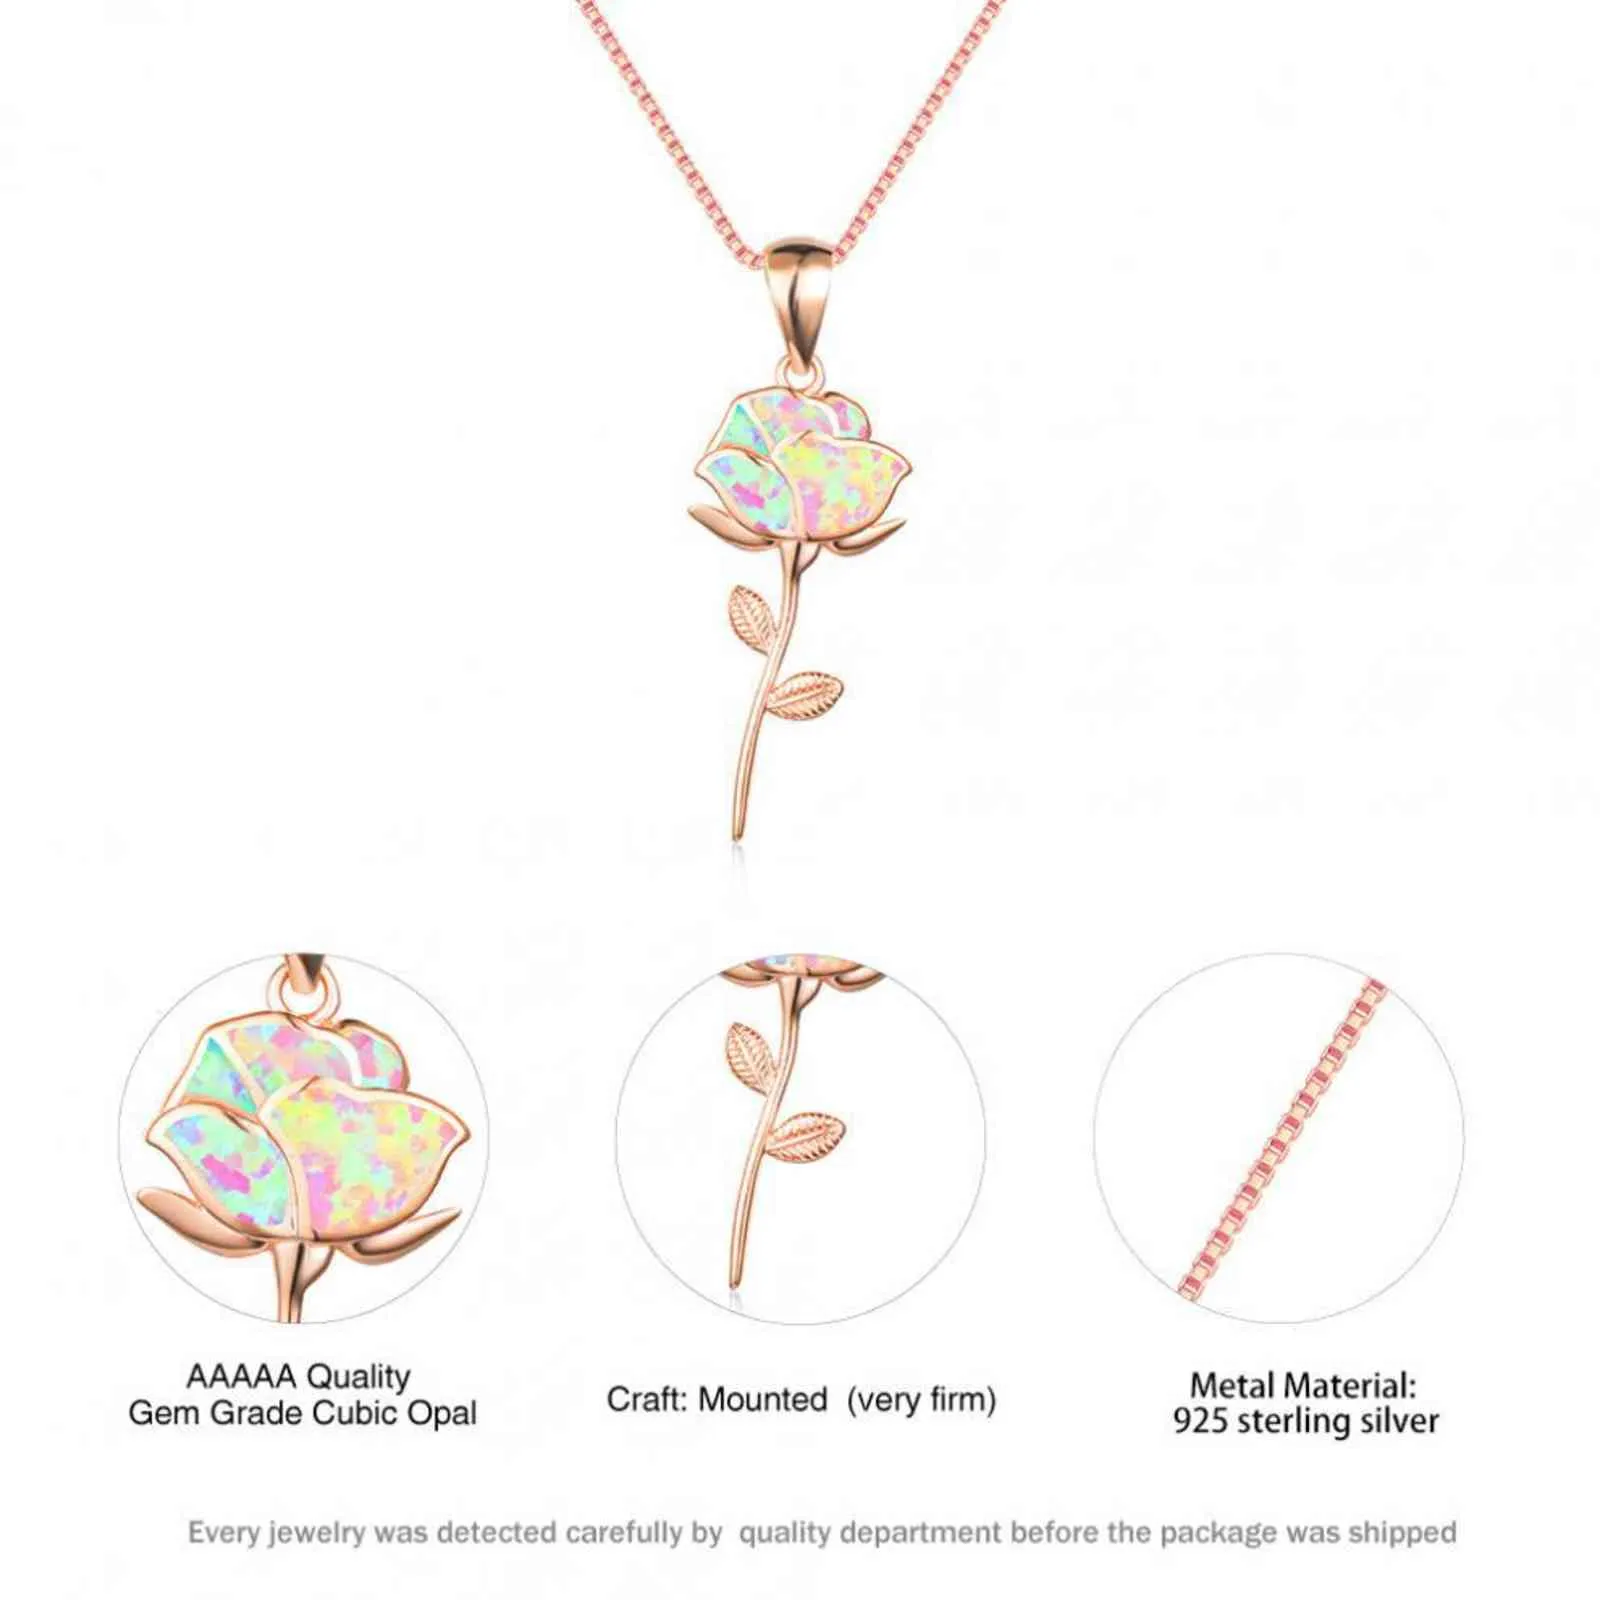 One Piece White Opal Rose Gold Flower Pendant Necklace For Women France Romantic Box Chain Wedding Neck Jewelry Gift7623254